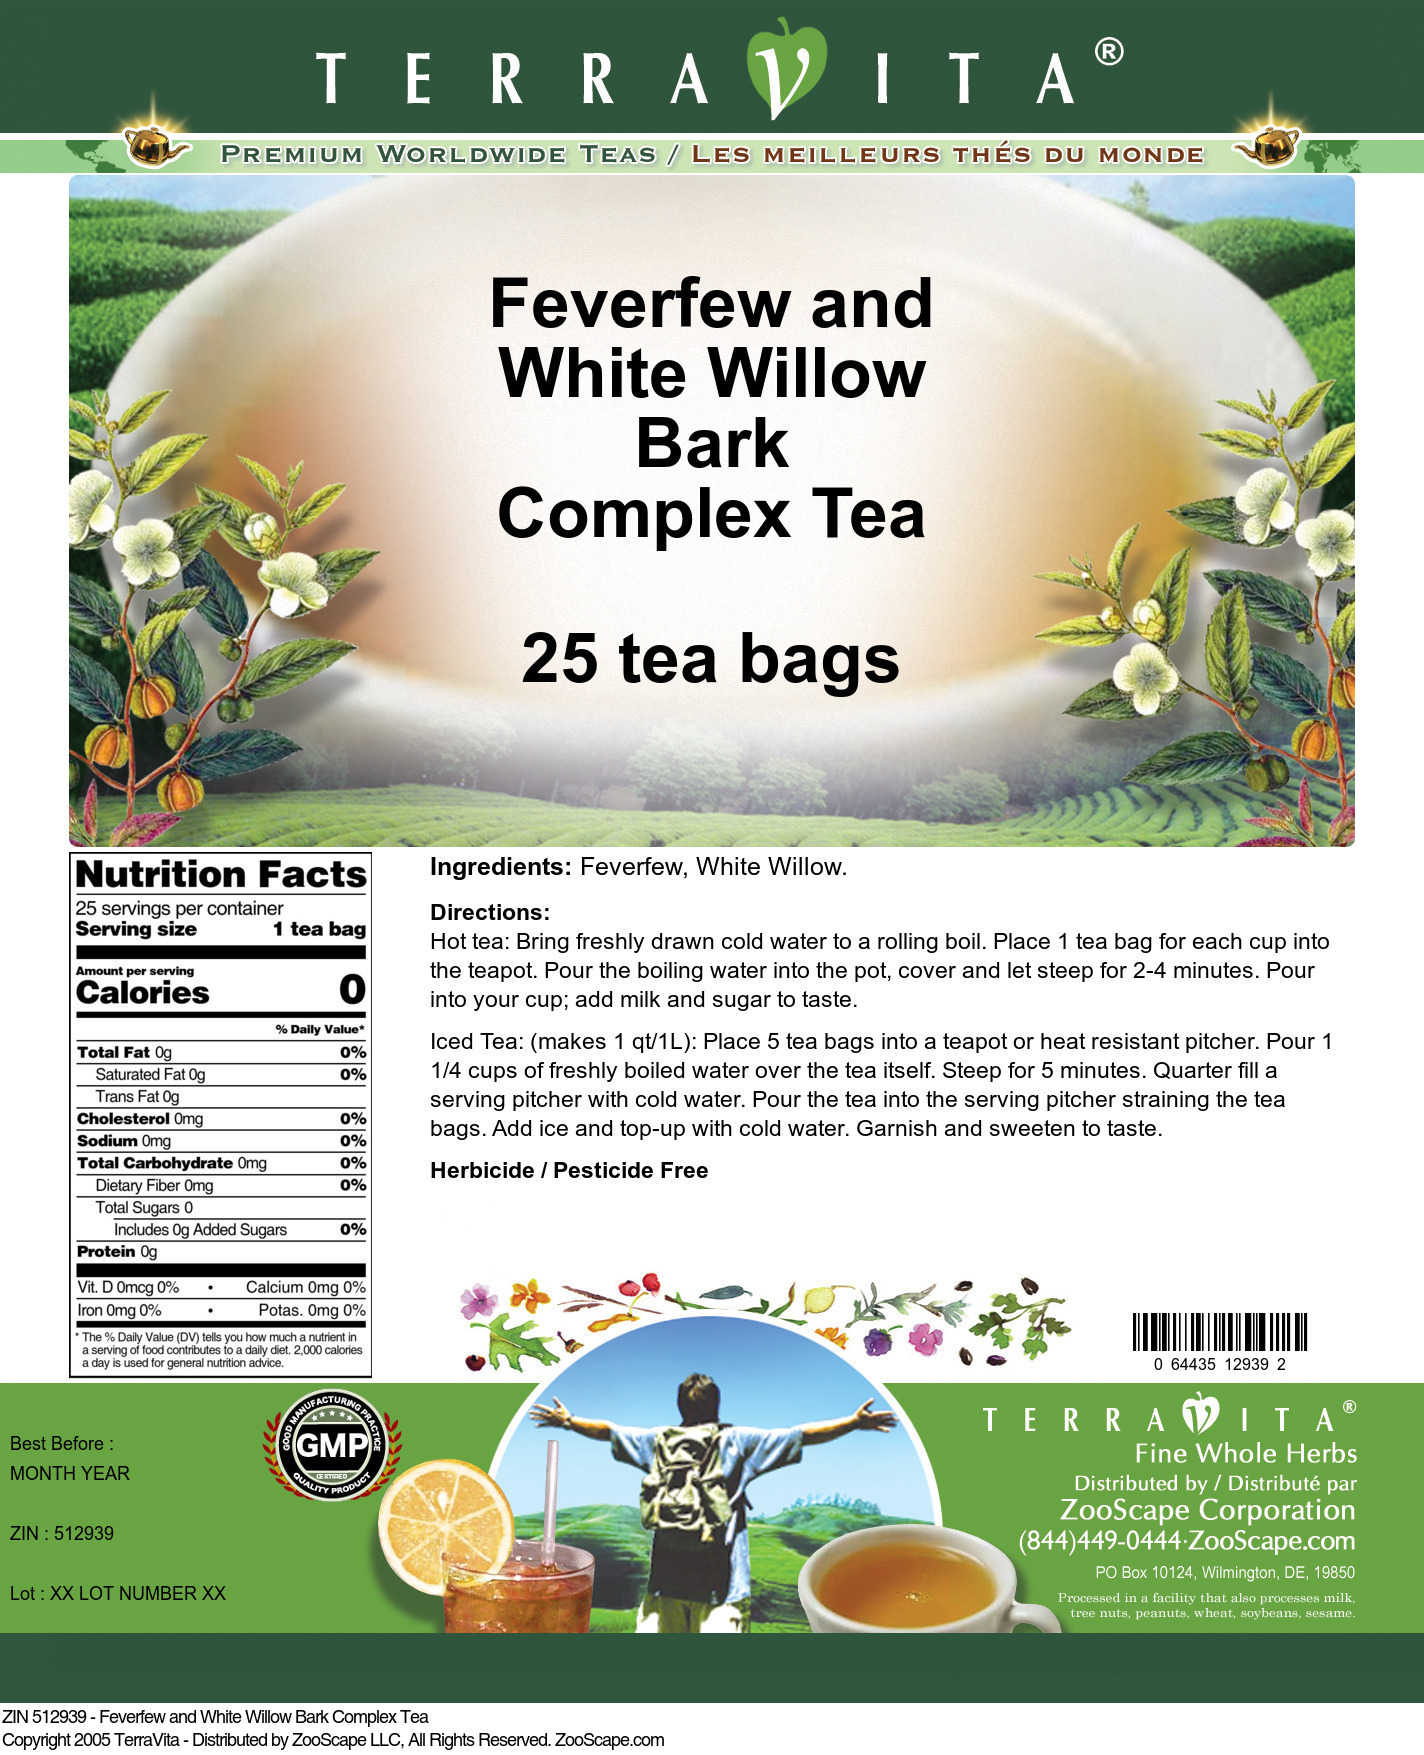 Feverfew and White Willow Bark Complex Tea - Label